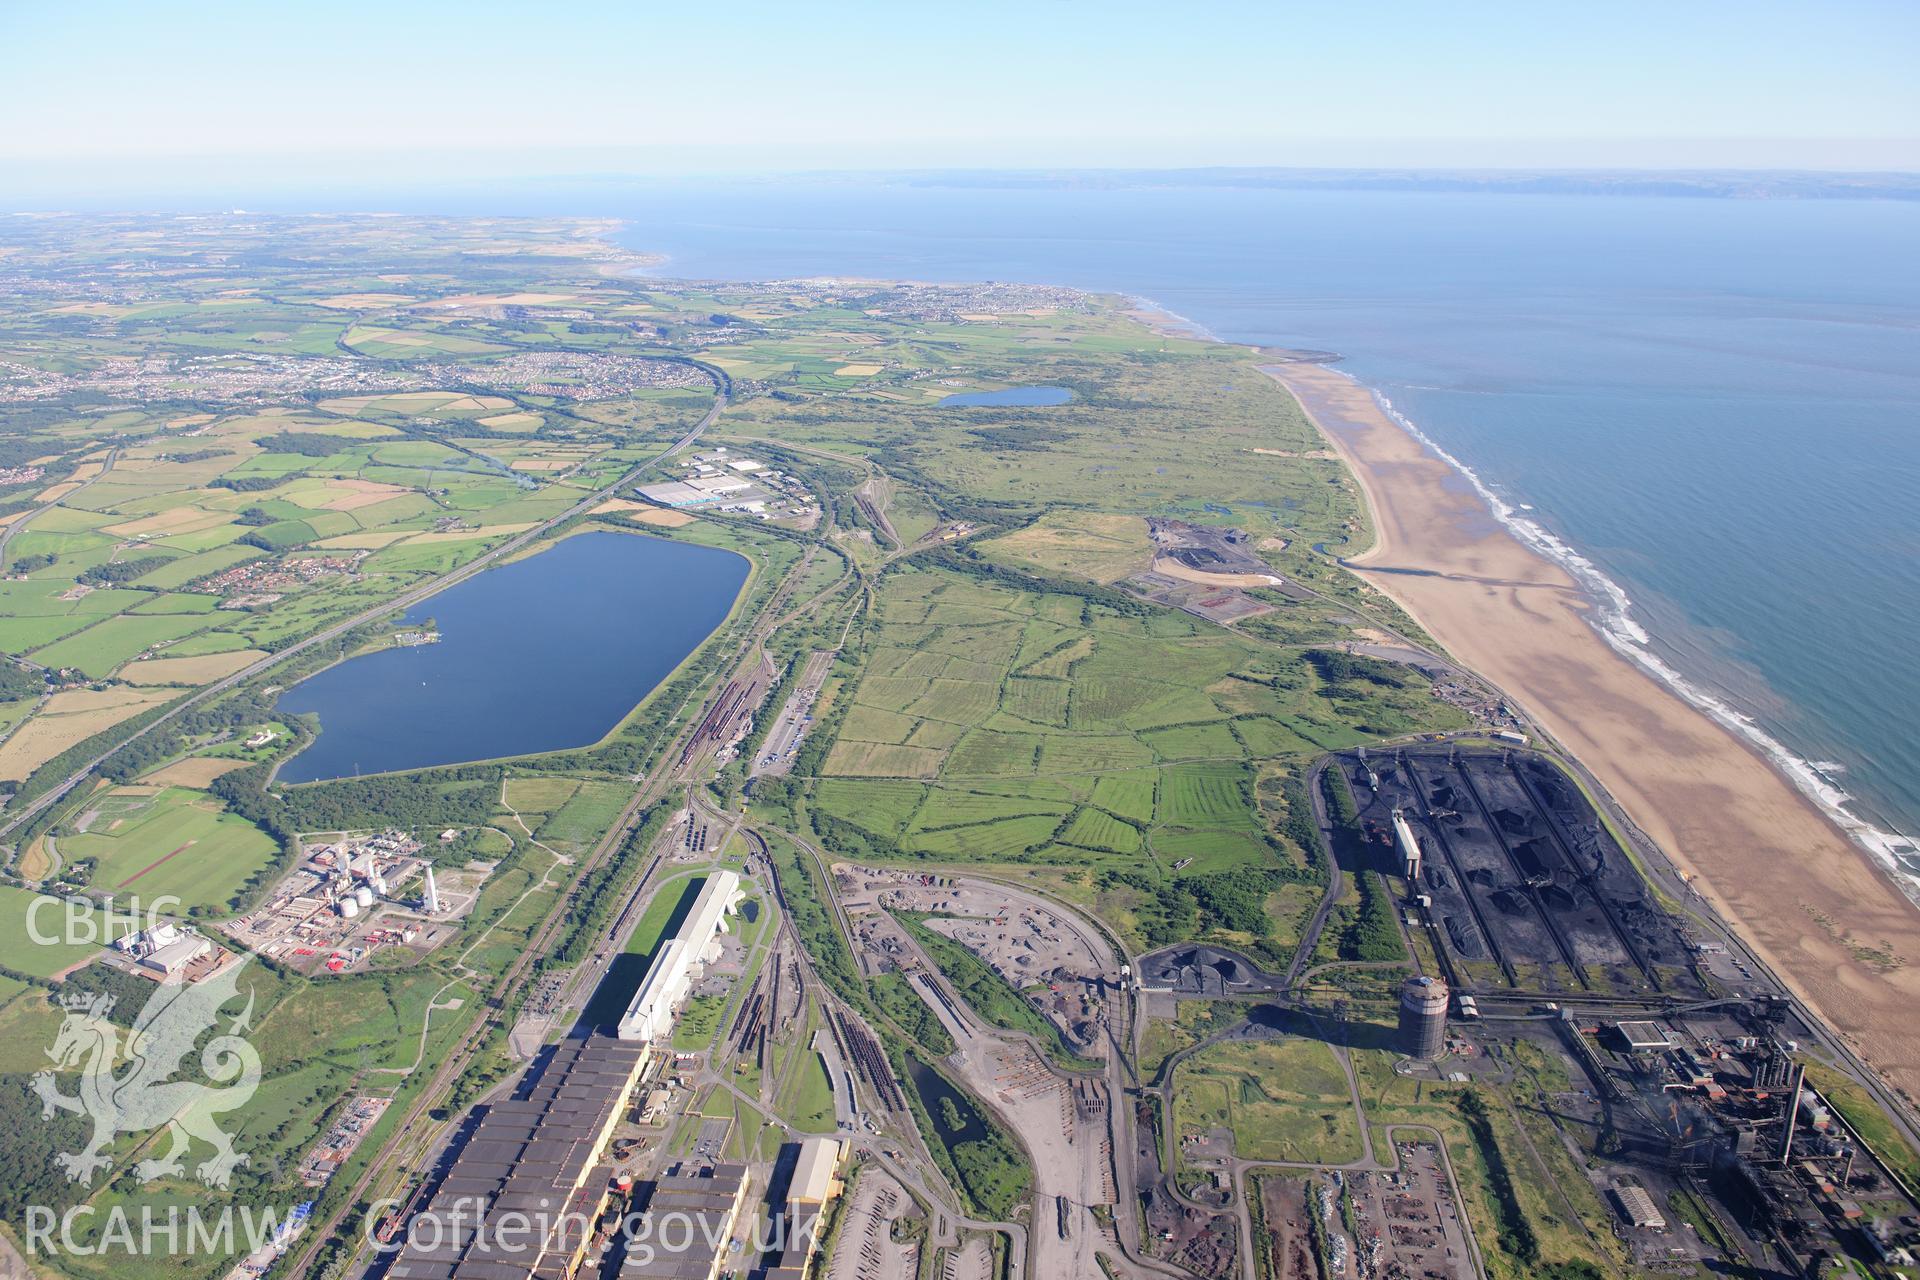 RCAHMW colour oblique photograph of Margam Steelworks, landscape looking south. Taken by Toby Driver on 24/07/2012.